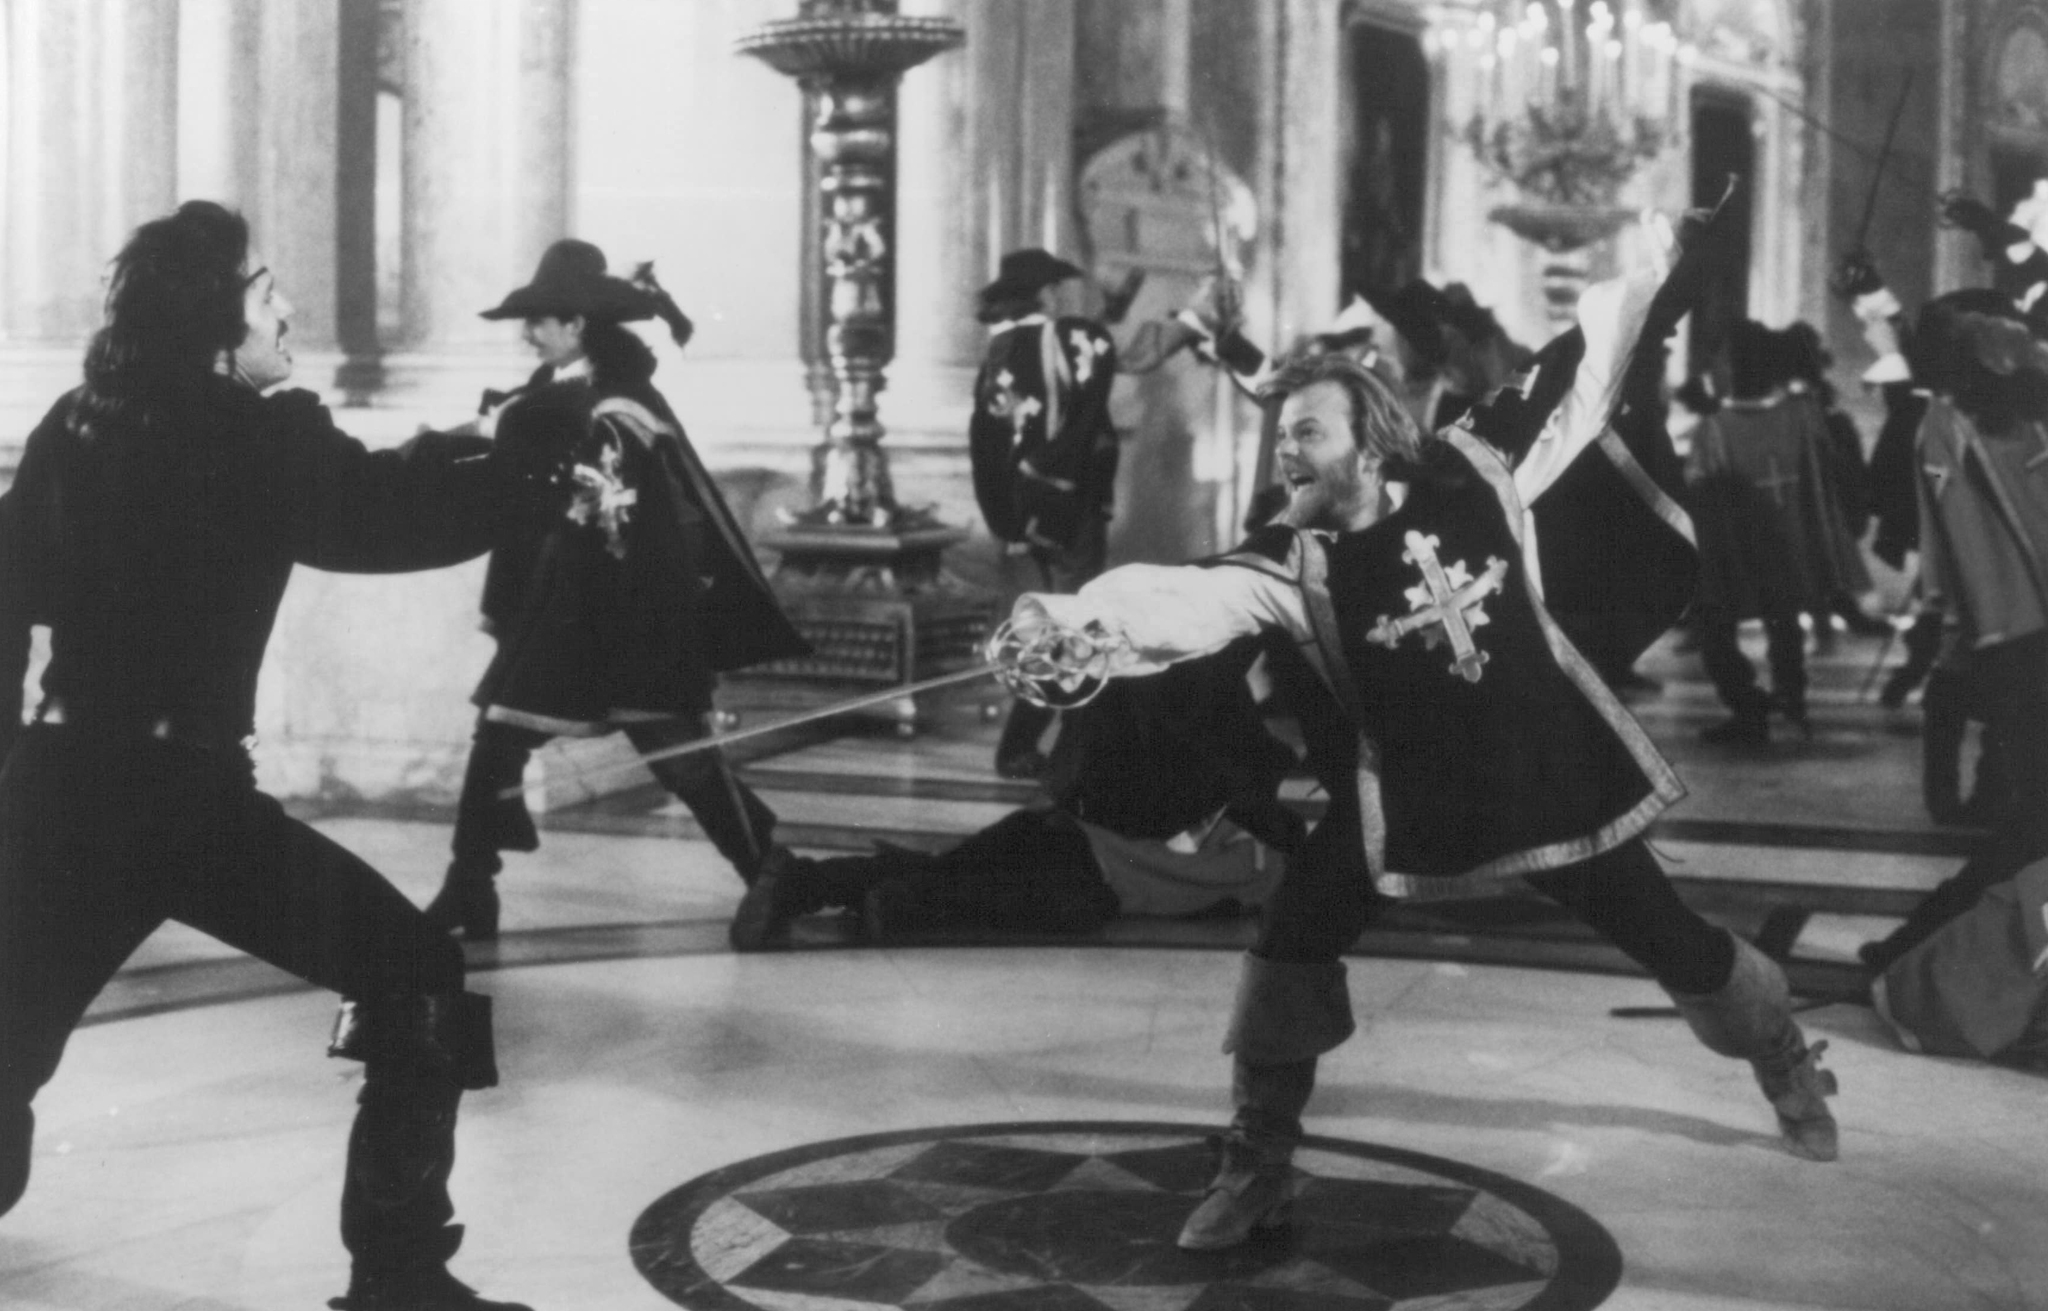 Still of Kiefer Sutherland and Michael Wincott in The Three Musketeers (1993)